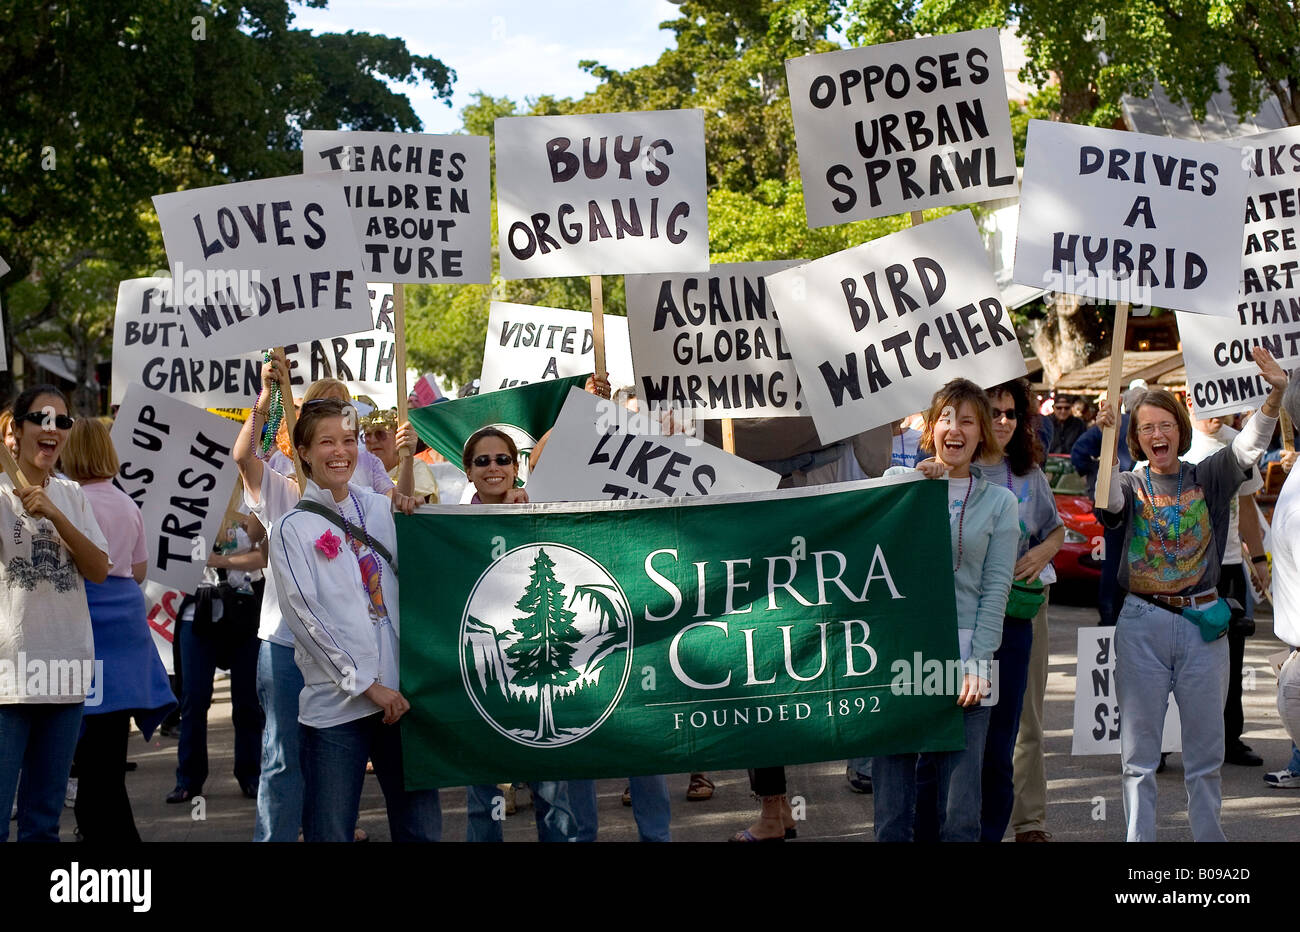 Rally promoting the Sierra Club, with women holding banners promoting environmental issues such as hybrid cars and organic food. Stock Photo